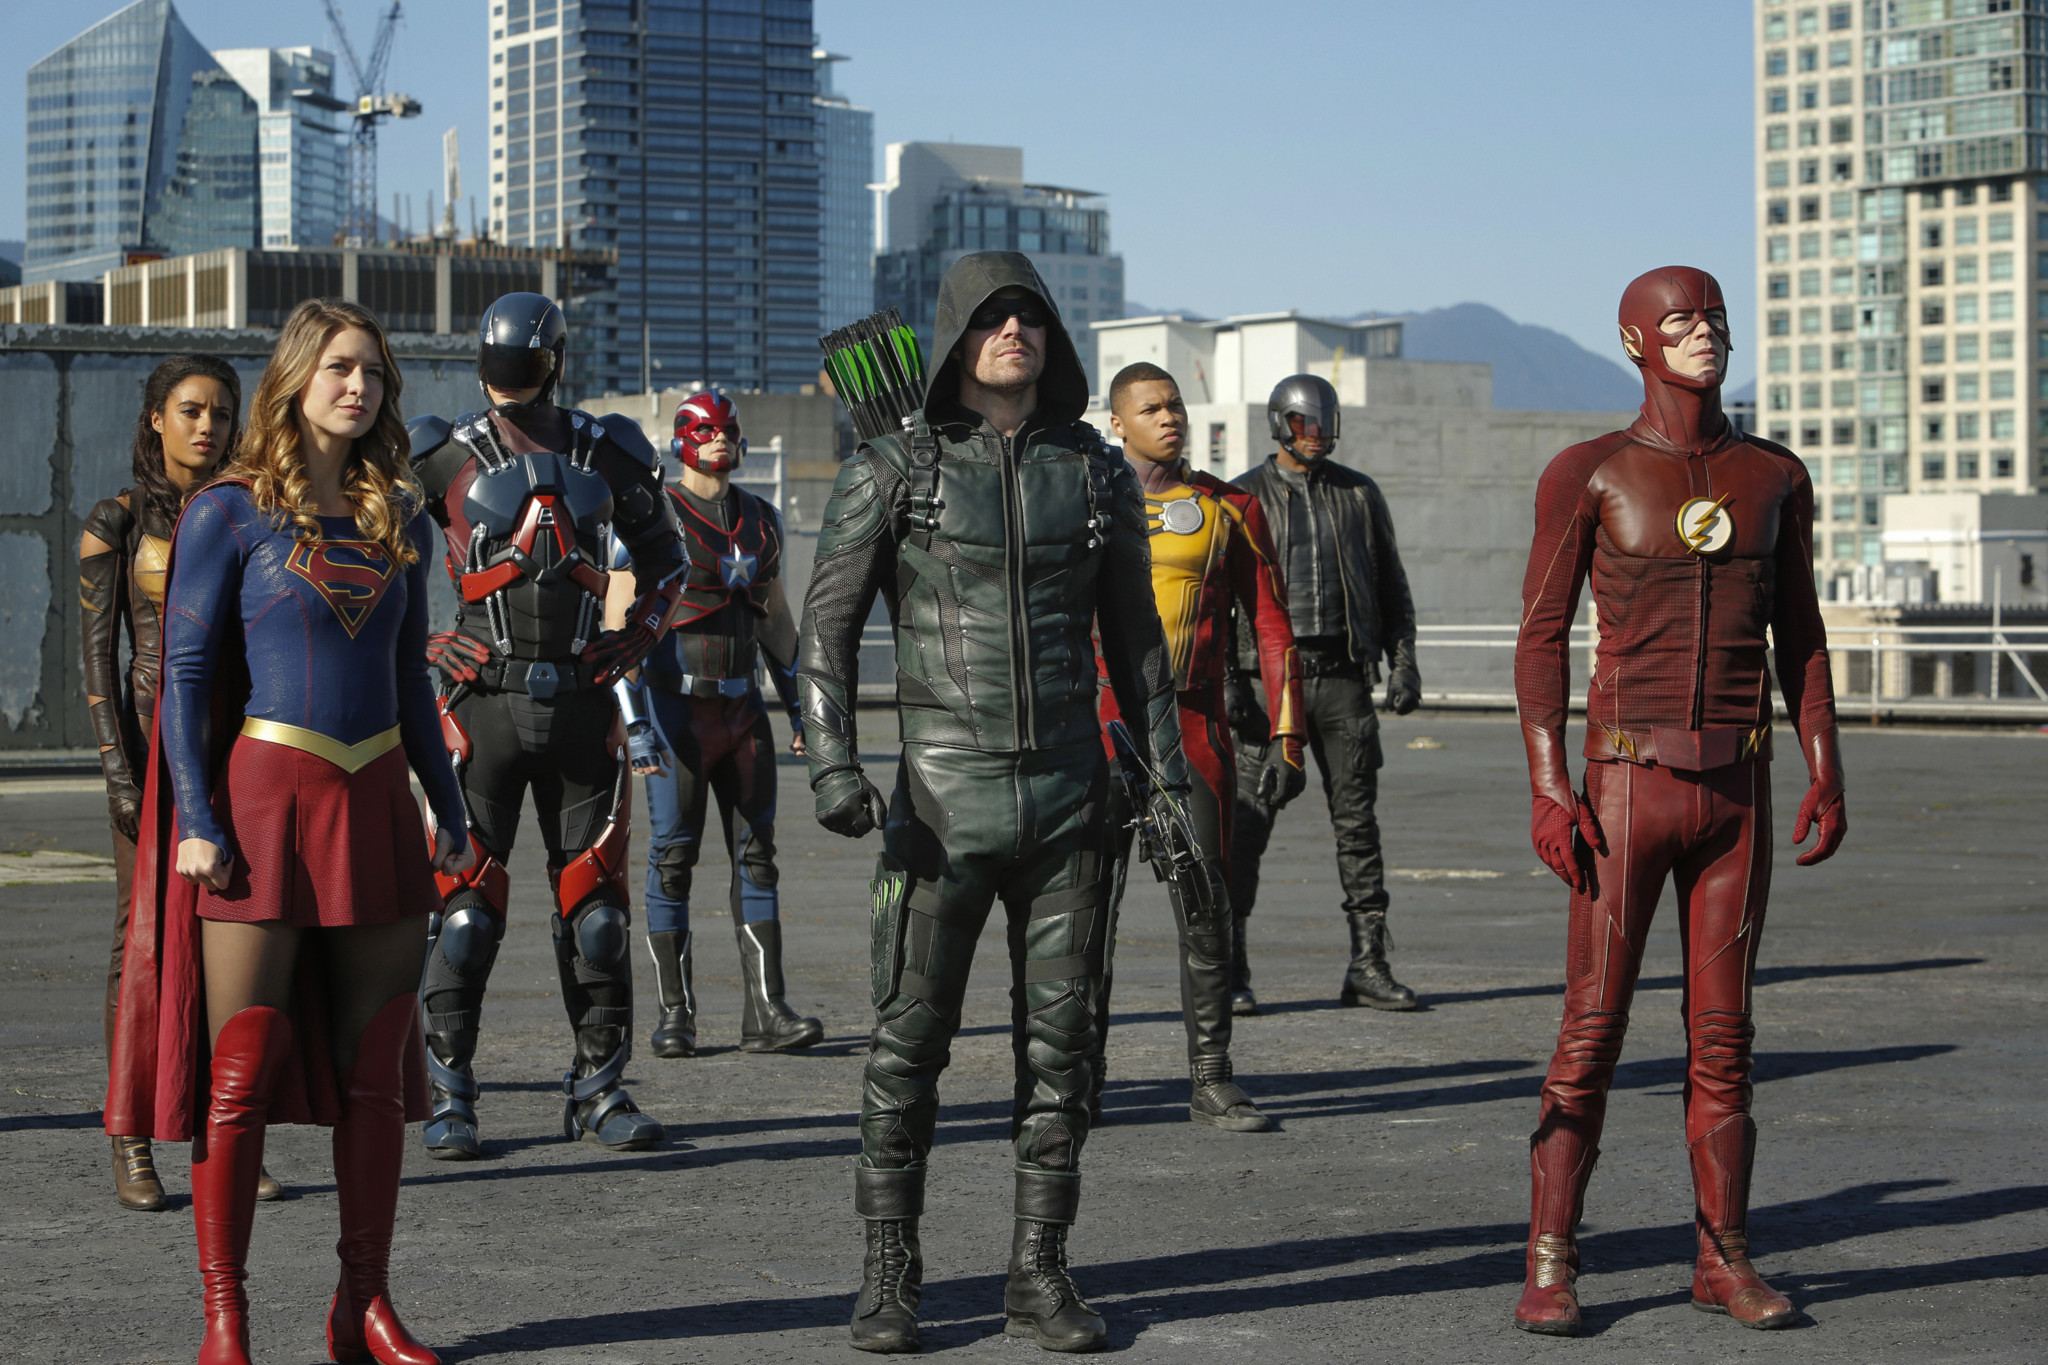 DC's Legends of Tomorrow --"Invasion!"-- Image LGN207a_0021.jpg -- Pictured (L-R): Maisie Richardson- Sellers as Amaya Jiwe/Vixen, Melissa Benoist as Kara/Supergirl, Brandon Routh as Ray Palmer/Atom, Nick Zano as Nate Heywood/Steel, Stephen Amell as Green Arrow, Franz Drameh as Jefferson "Jax" Jackson, David Ramsey as John Diggle and Grant Gustin as The Flash -- Photo: Bettina Strauss/The CW -- © 2016 The CW Network, LLC. All Rights Reserved.